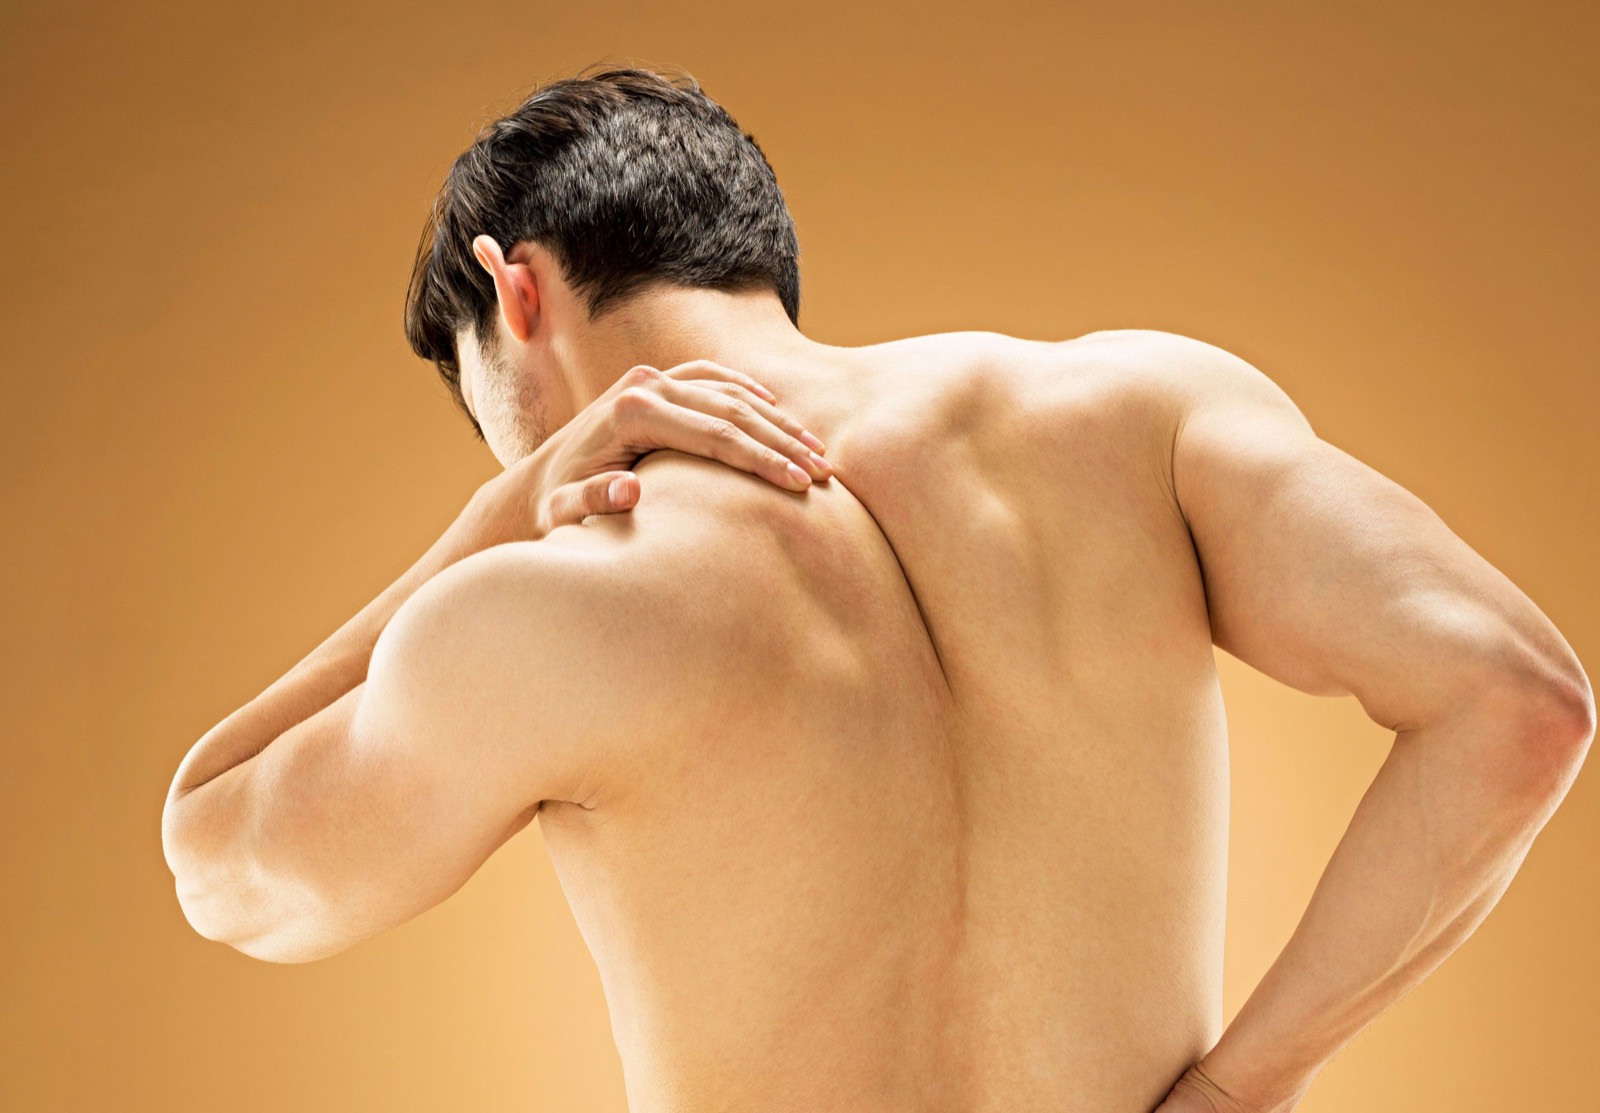 If You Can Get 15 on This Quiz on Your First Try, You Definitely Know Lot About Human Body shoulder blade